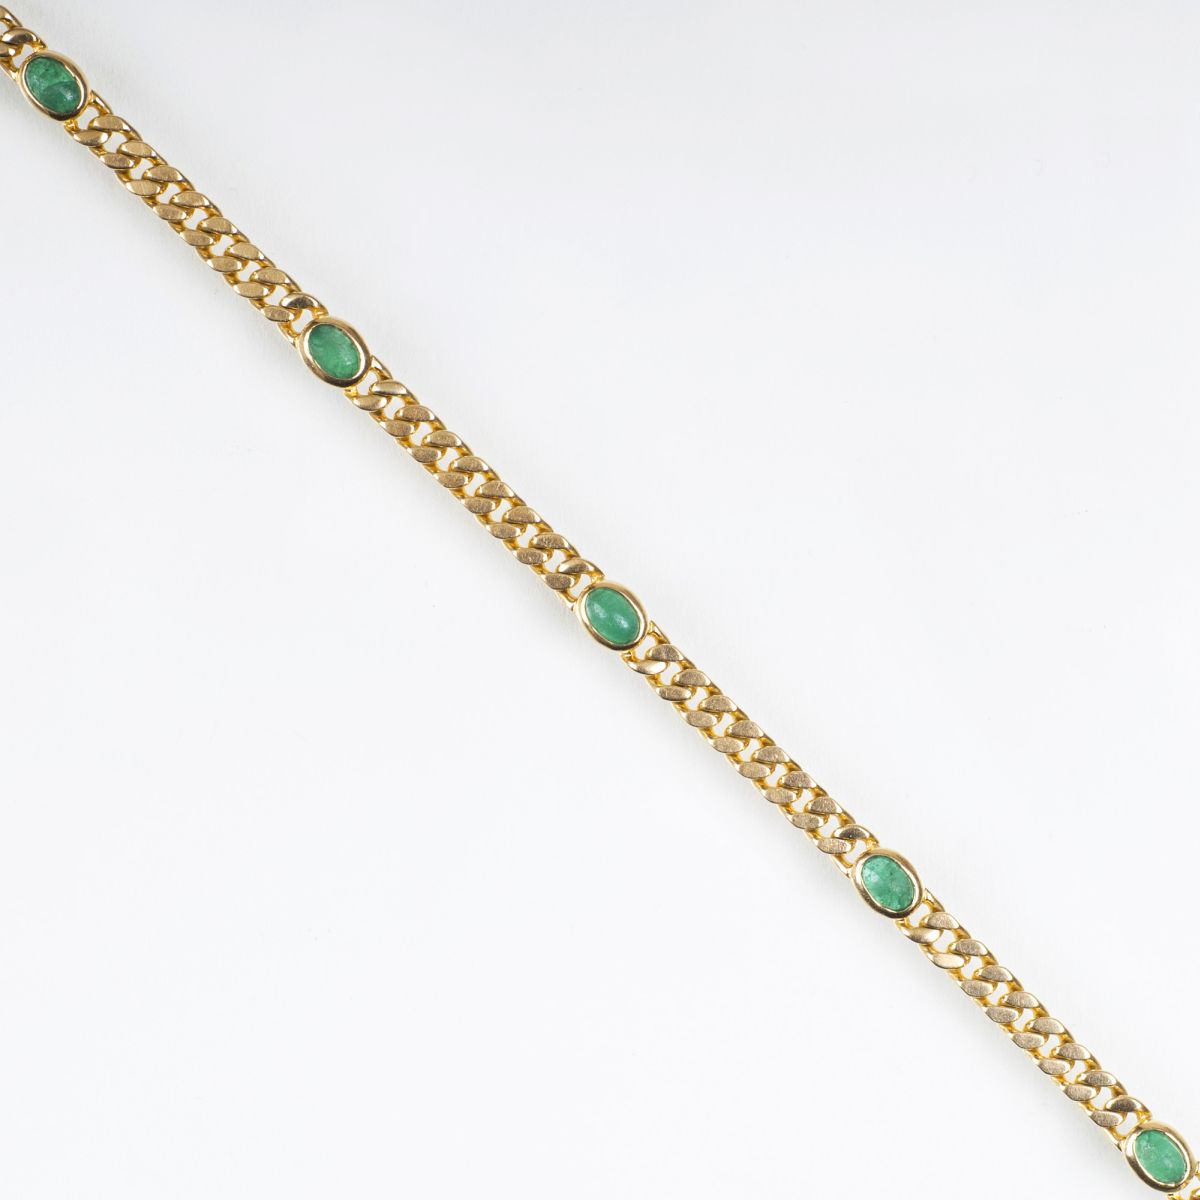 A Gold Bracelet with Emeralds